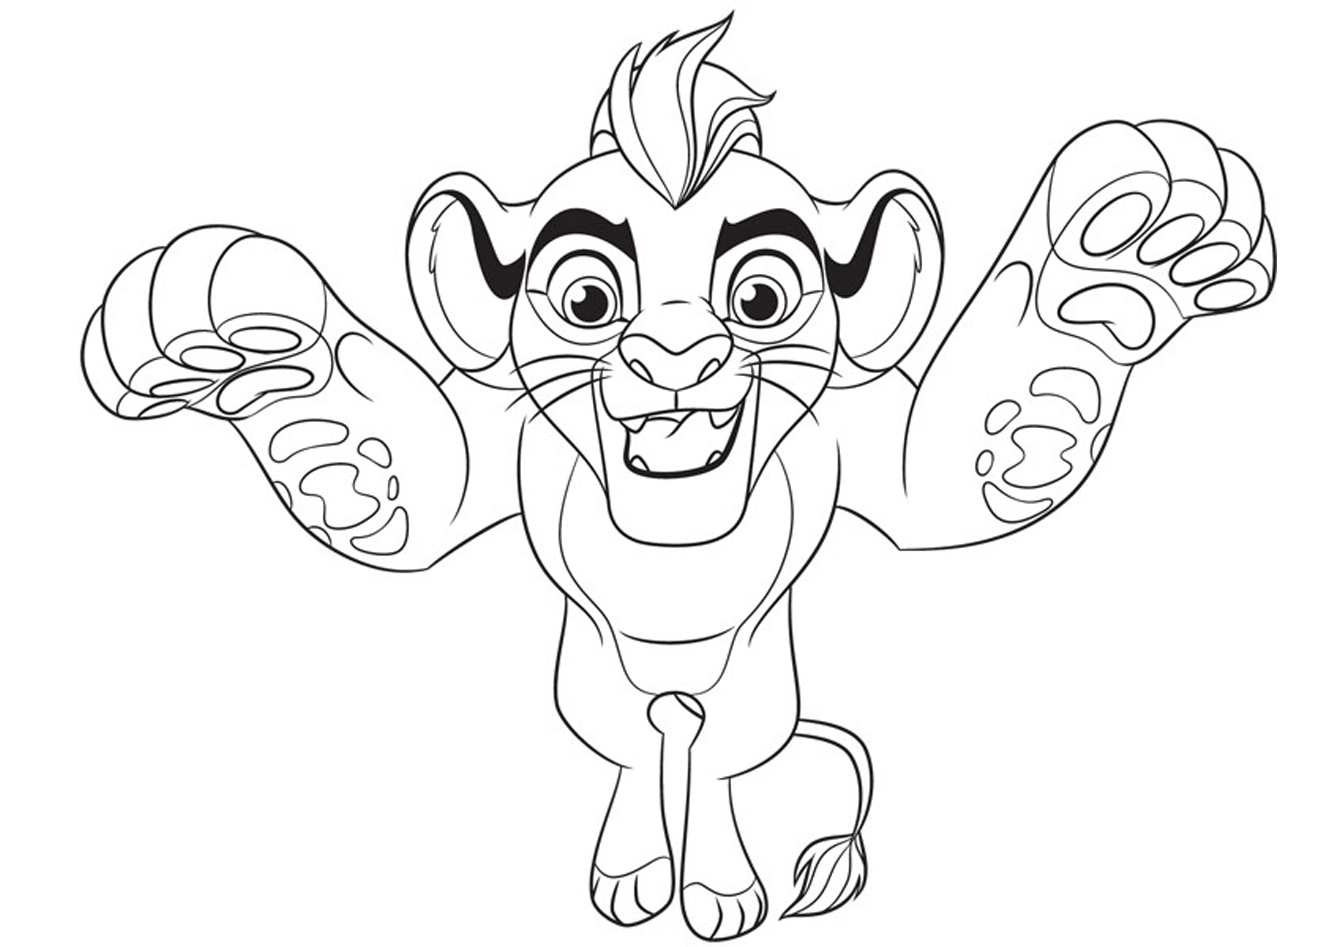 Free Lion Guard Coloring Pages at GetDrawings Free download